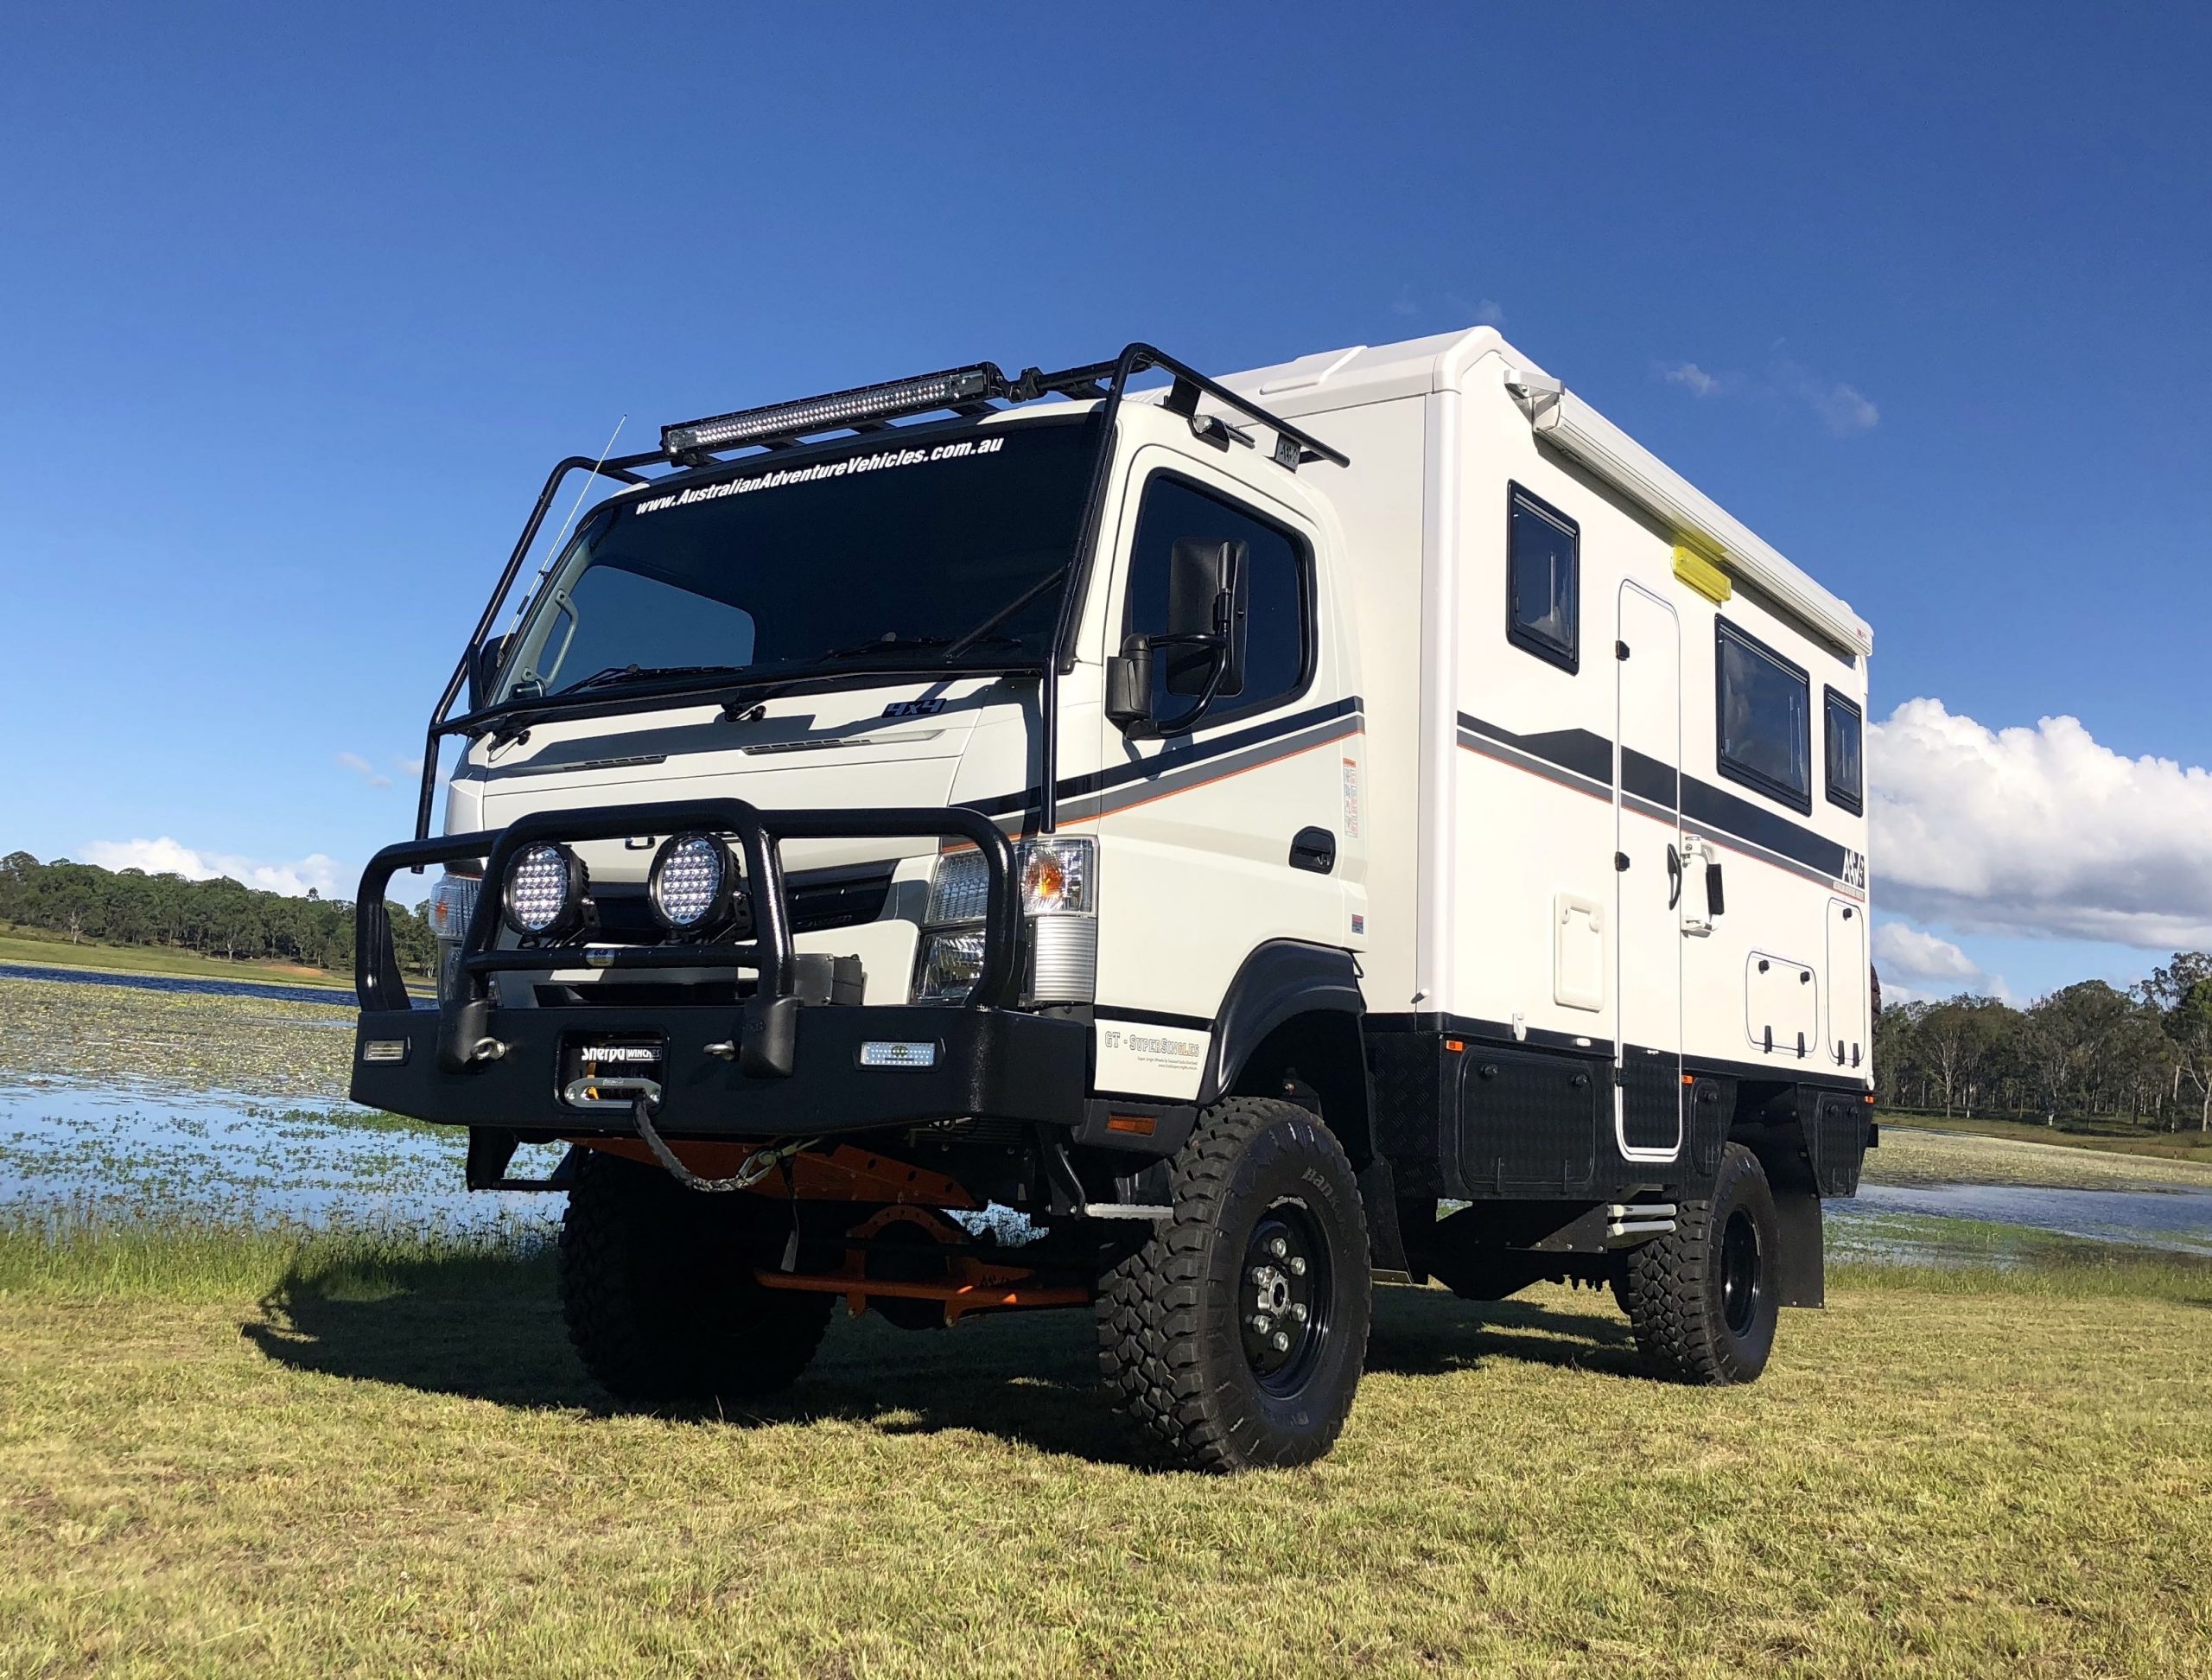 4x4 Motorhomes, Expedition Vehicles, Discovery Australia